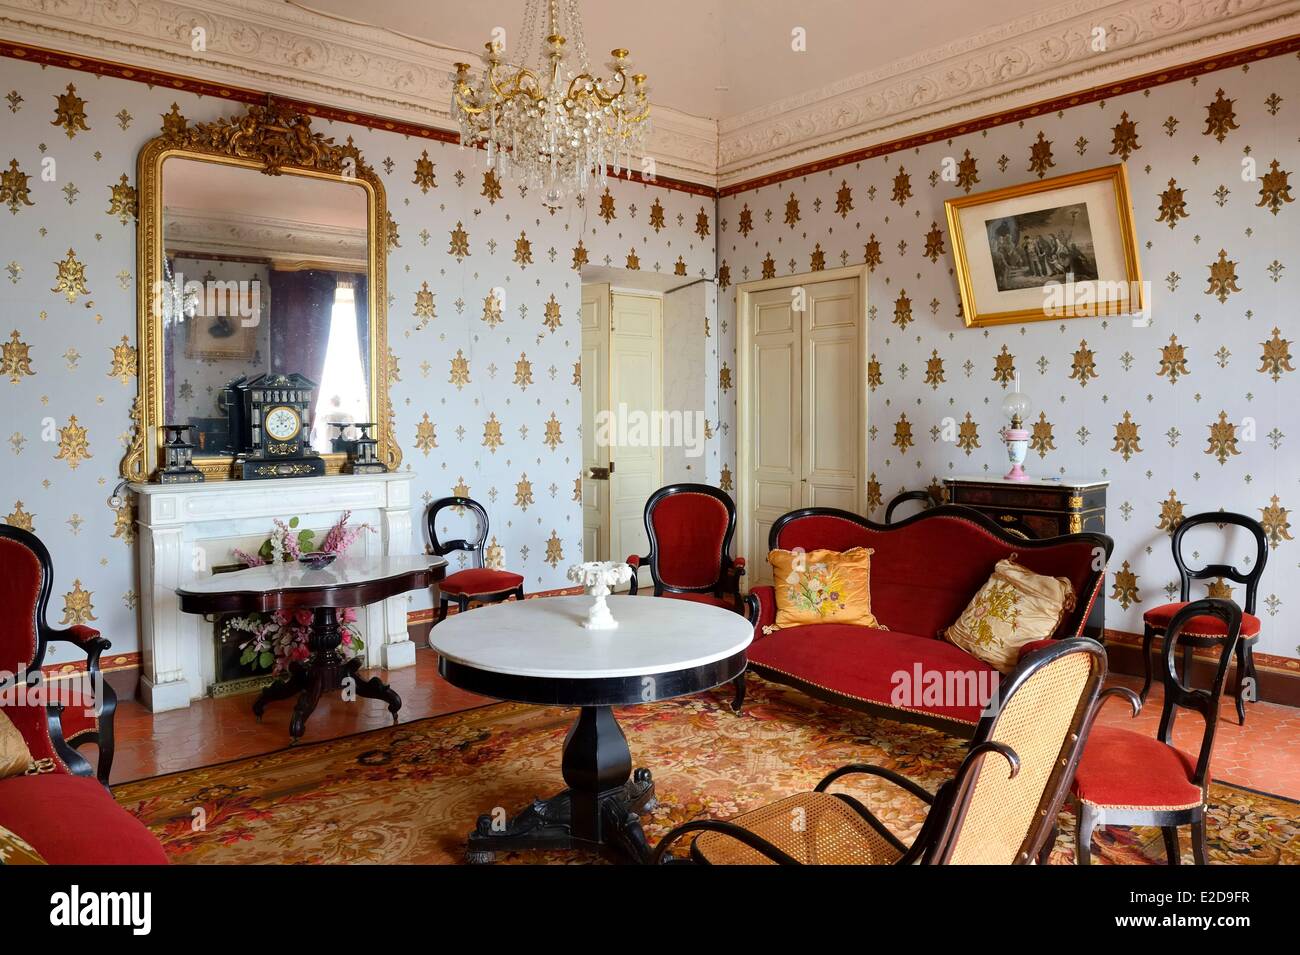 France, Haute Corse, Cap Corse, Rogliano, the palazzu Nicrosi (Palazzi or House of American), Pierre Nicrosi with his three brothers prospered in trade, real estate and cotton in Alabama, the main living room is still decorated with the floral wallpaper with gold leaf placed here 135 years ago Stock Photo